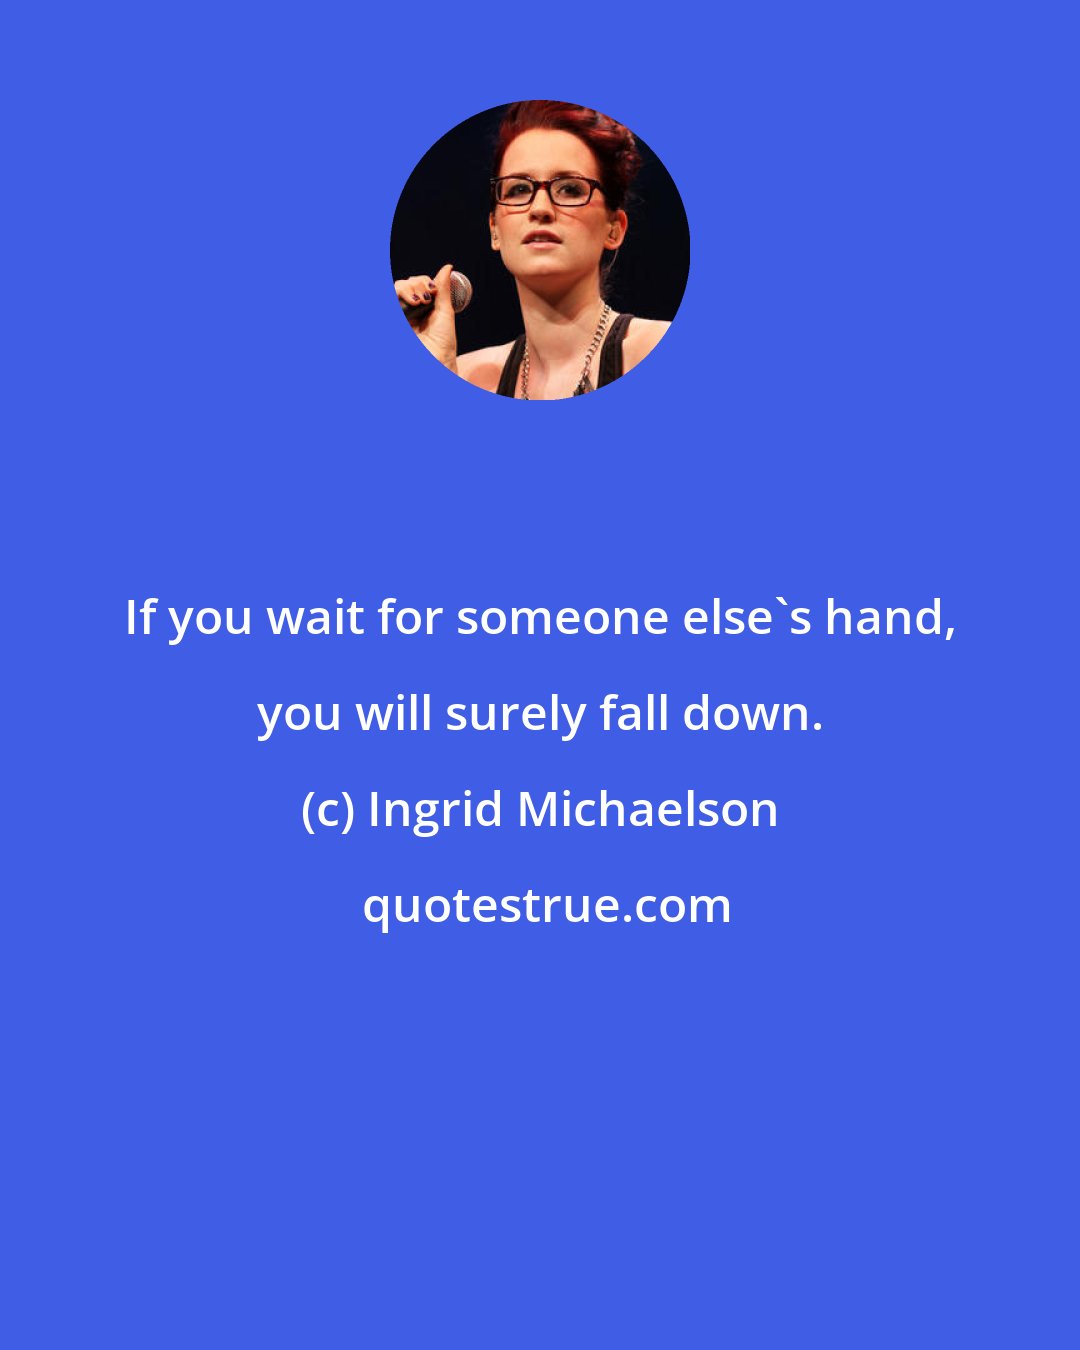 Ingrid Michaelson: If you wait for someone else's hand, you will surely fall down.